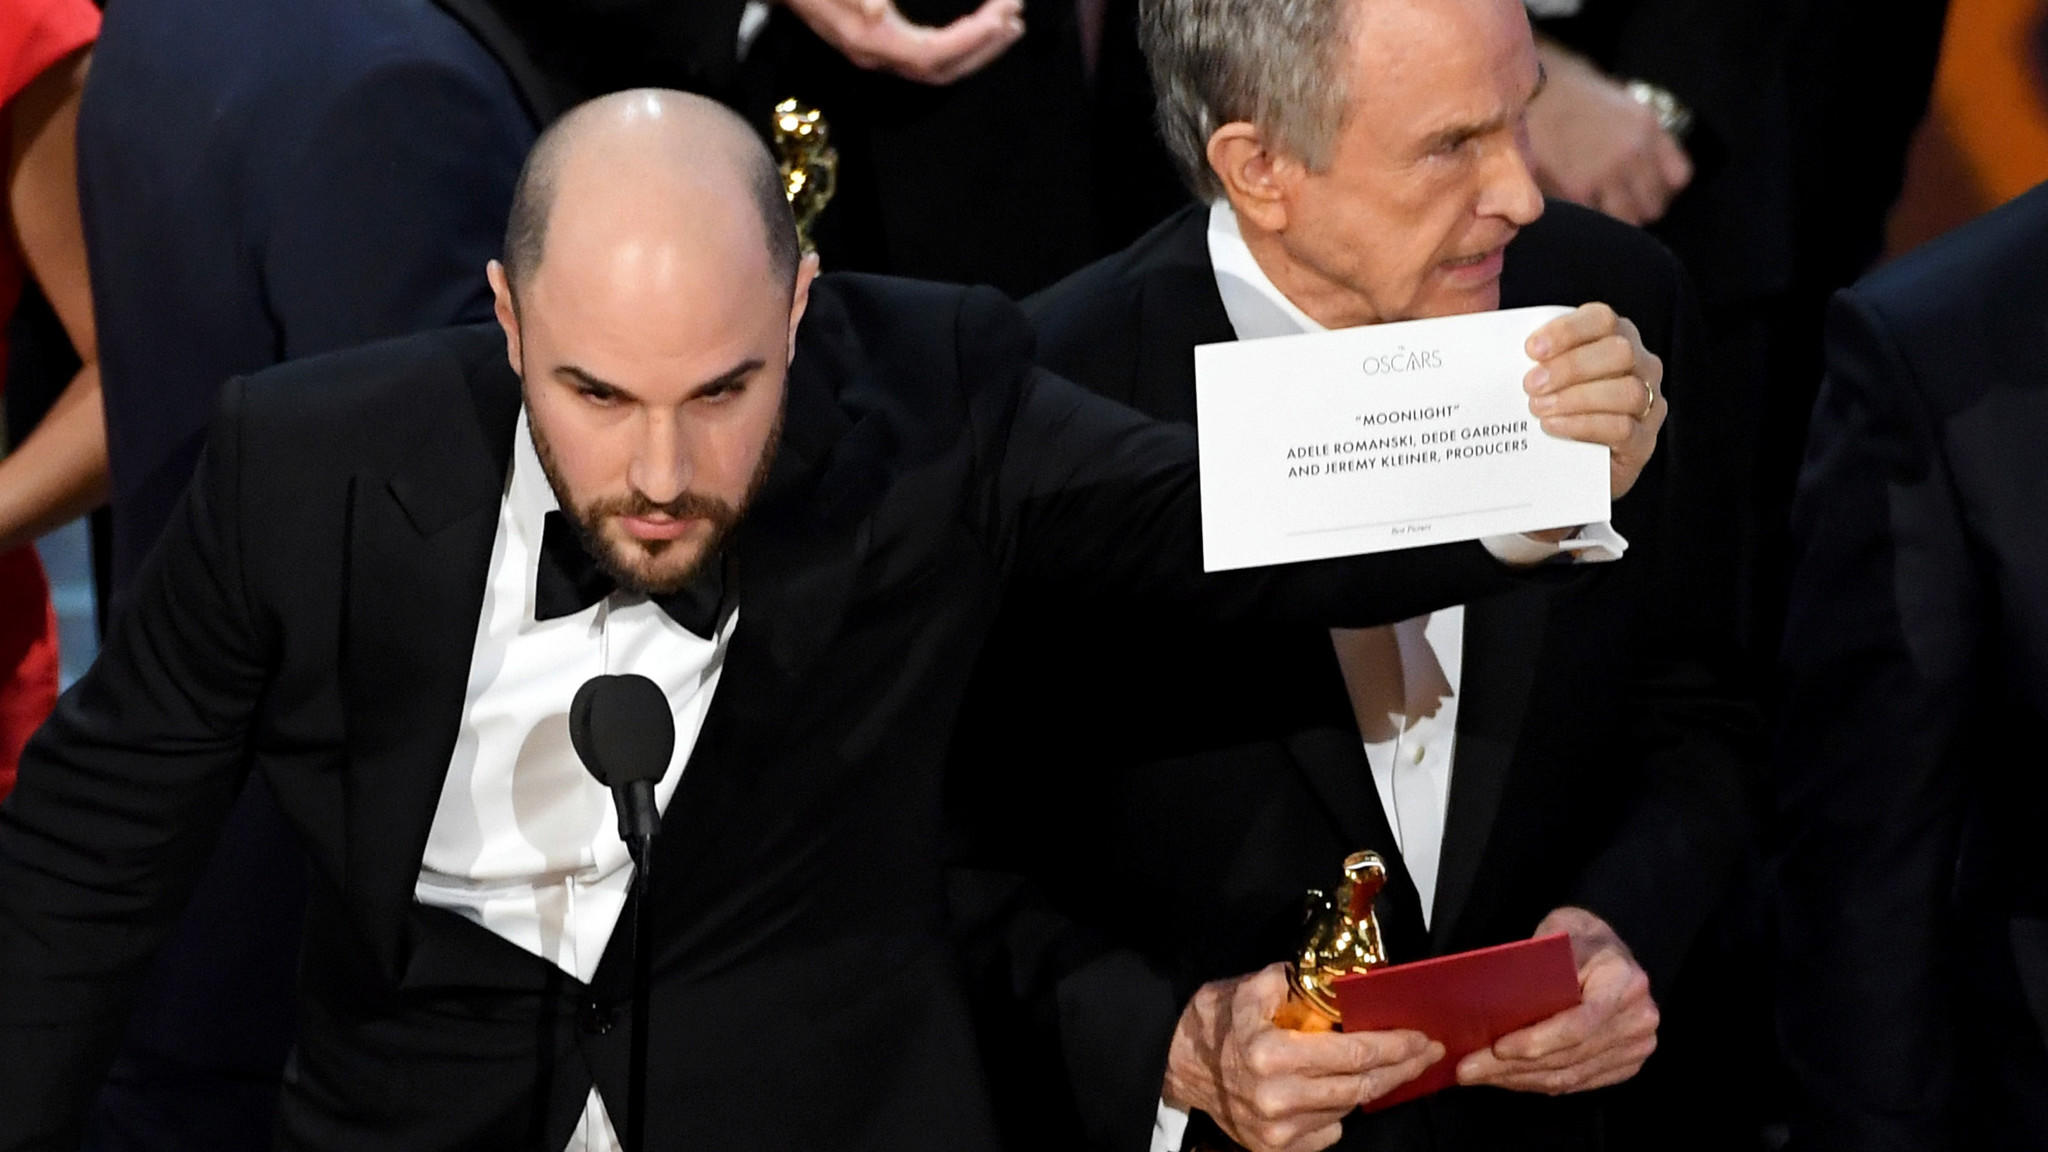 Jordan Horowitz makes sure that everyone sees who is the actual Best Picture winner of The Oscars 2017 | onetakekate.com